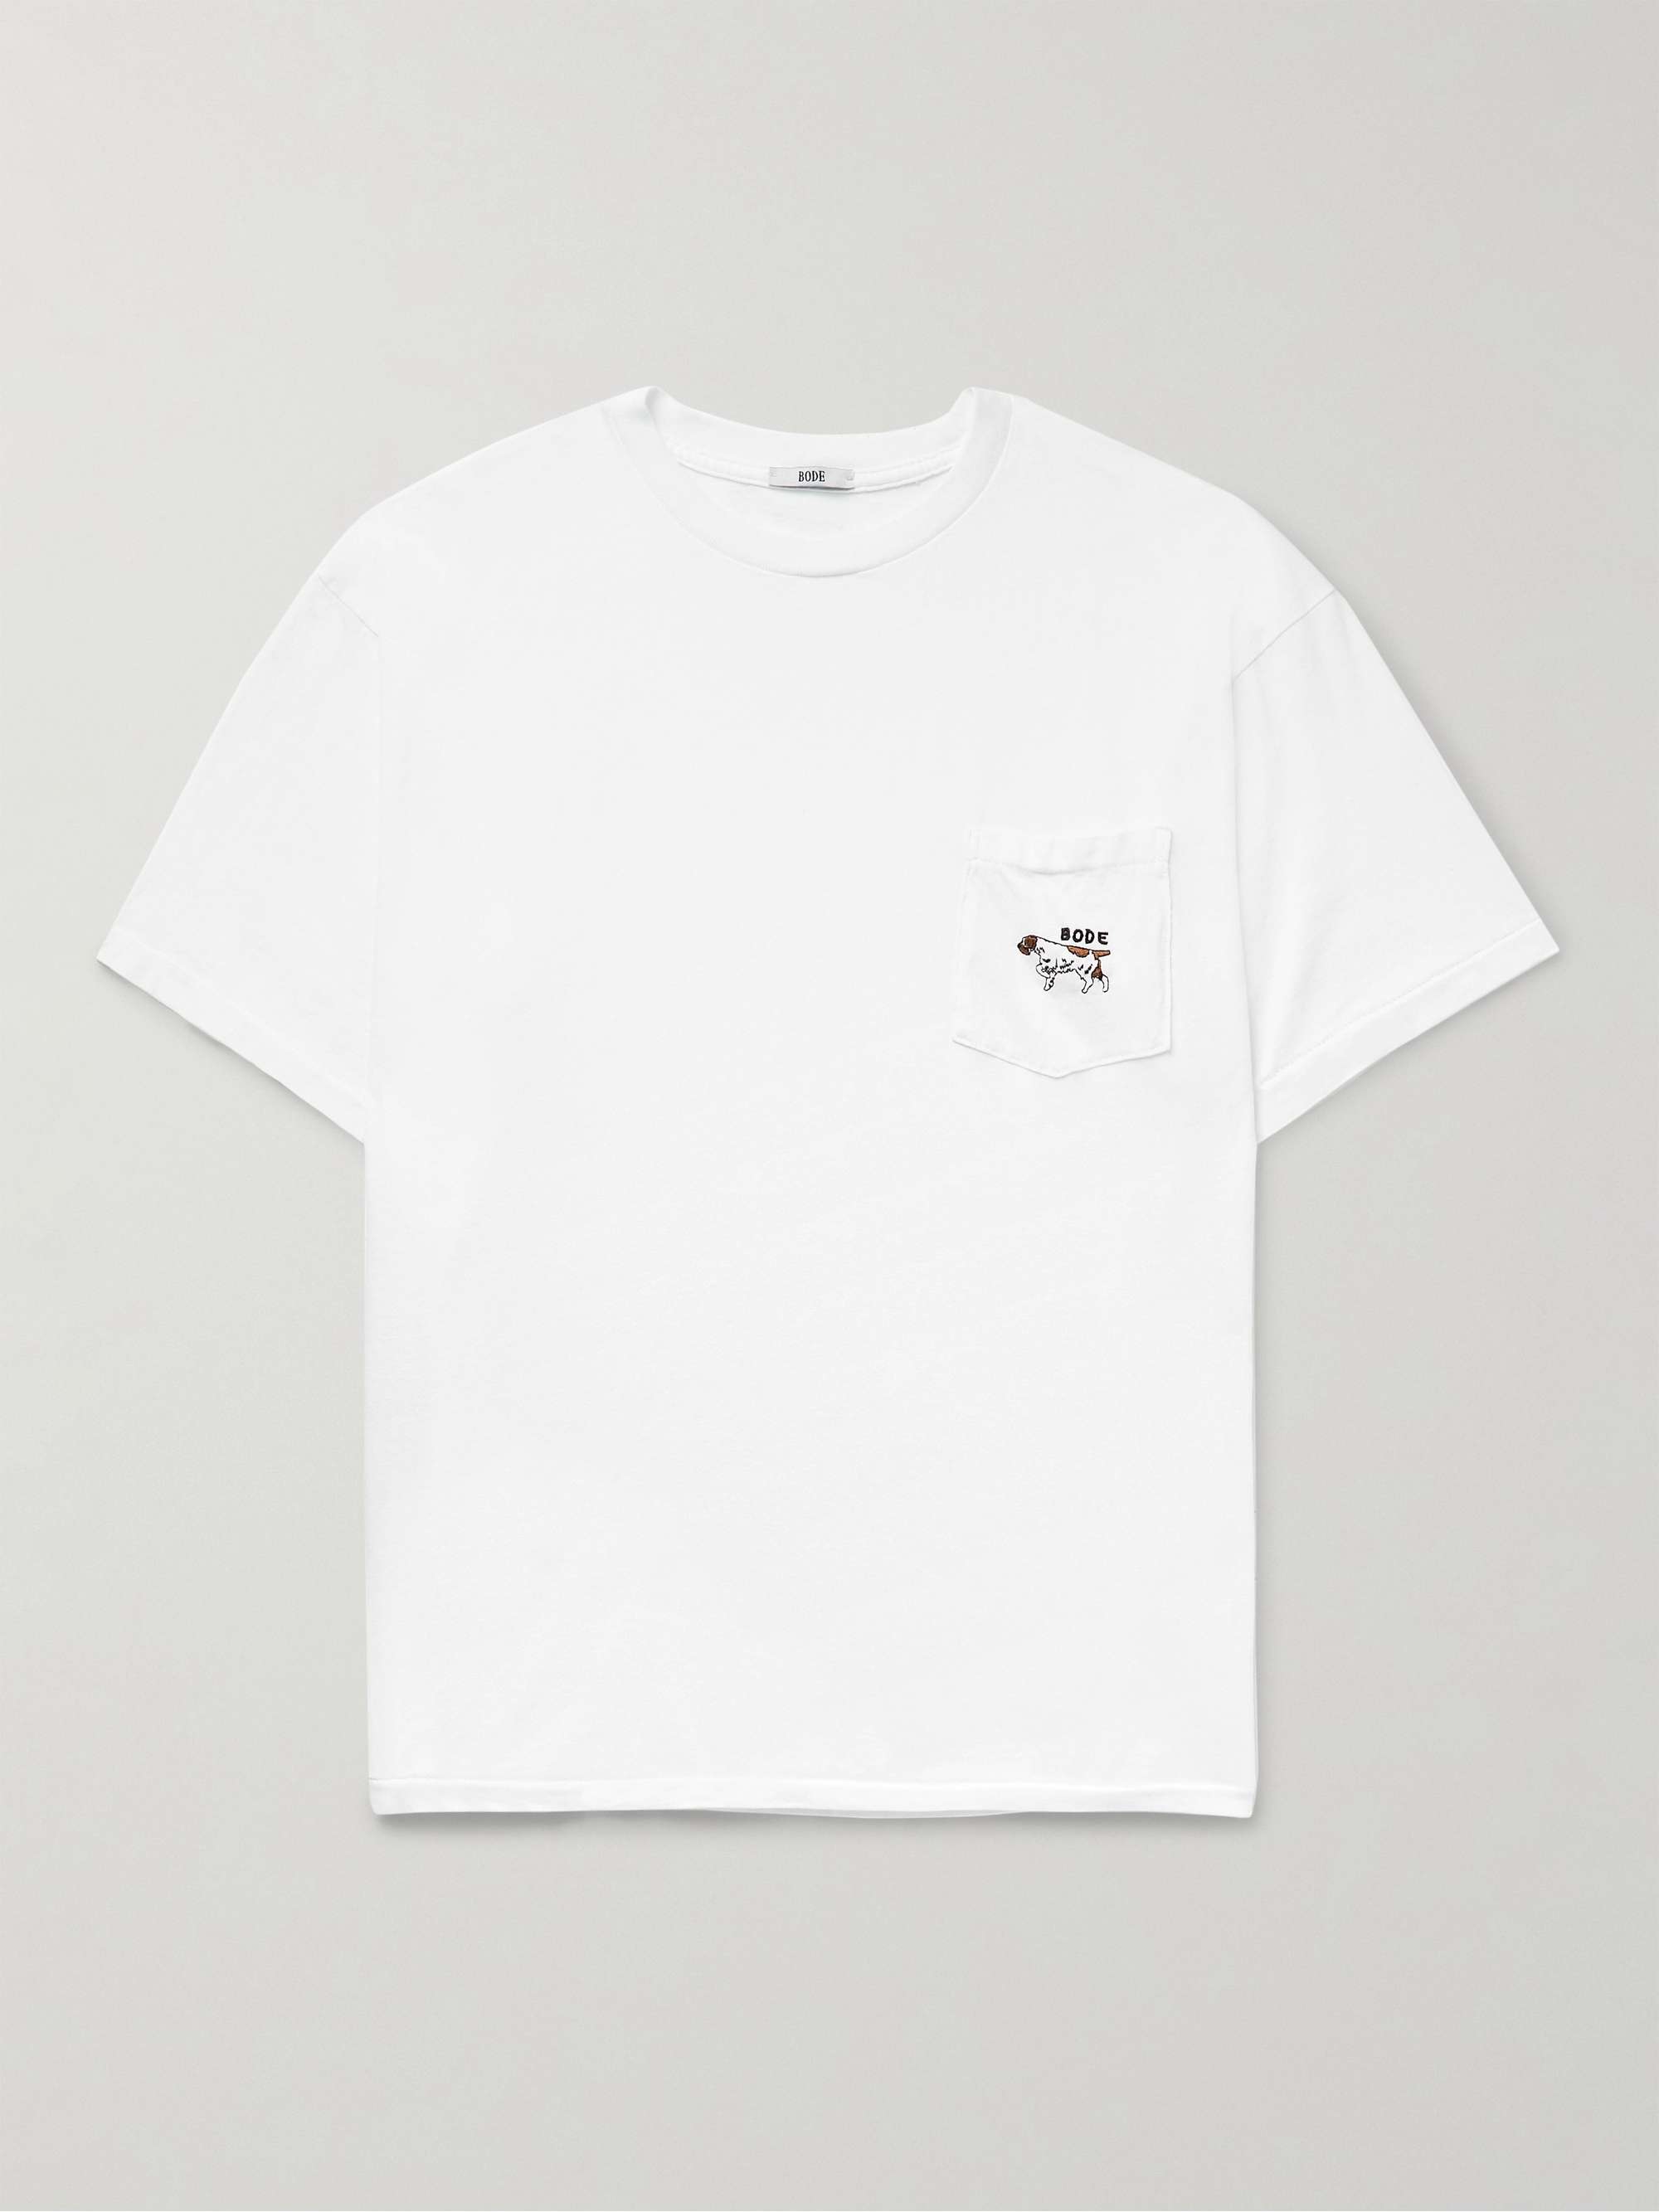 BODE Embroidered Cotton-Jersey T-Shirt